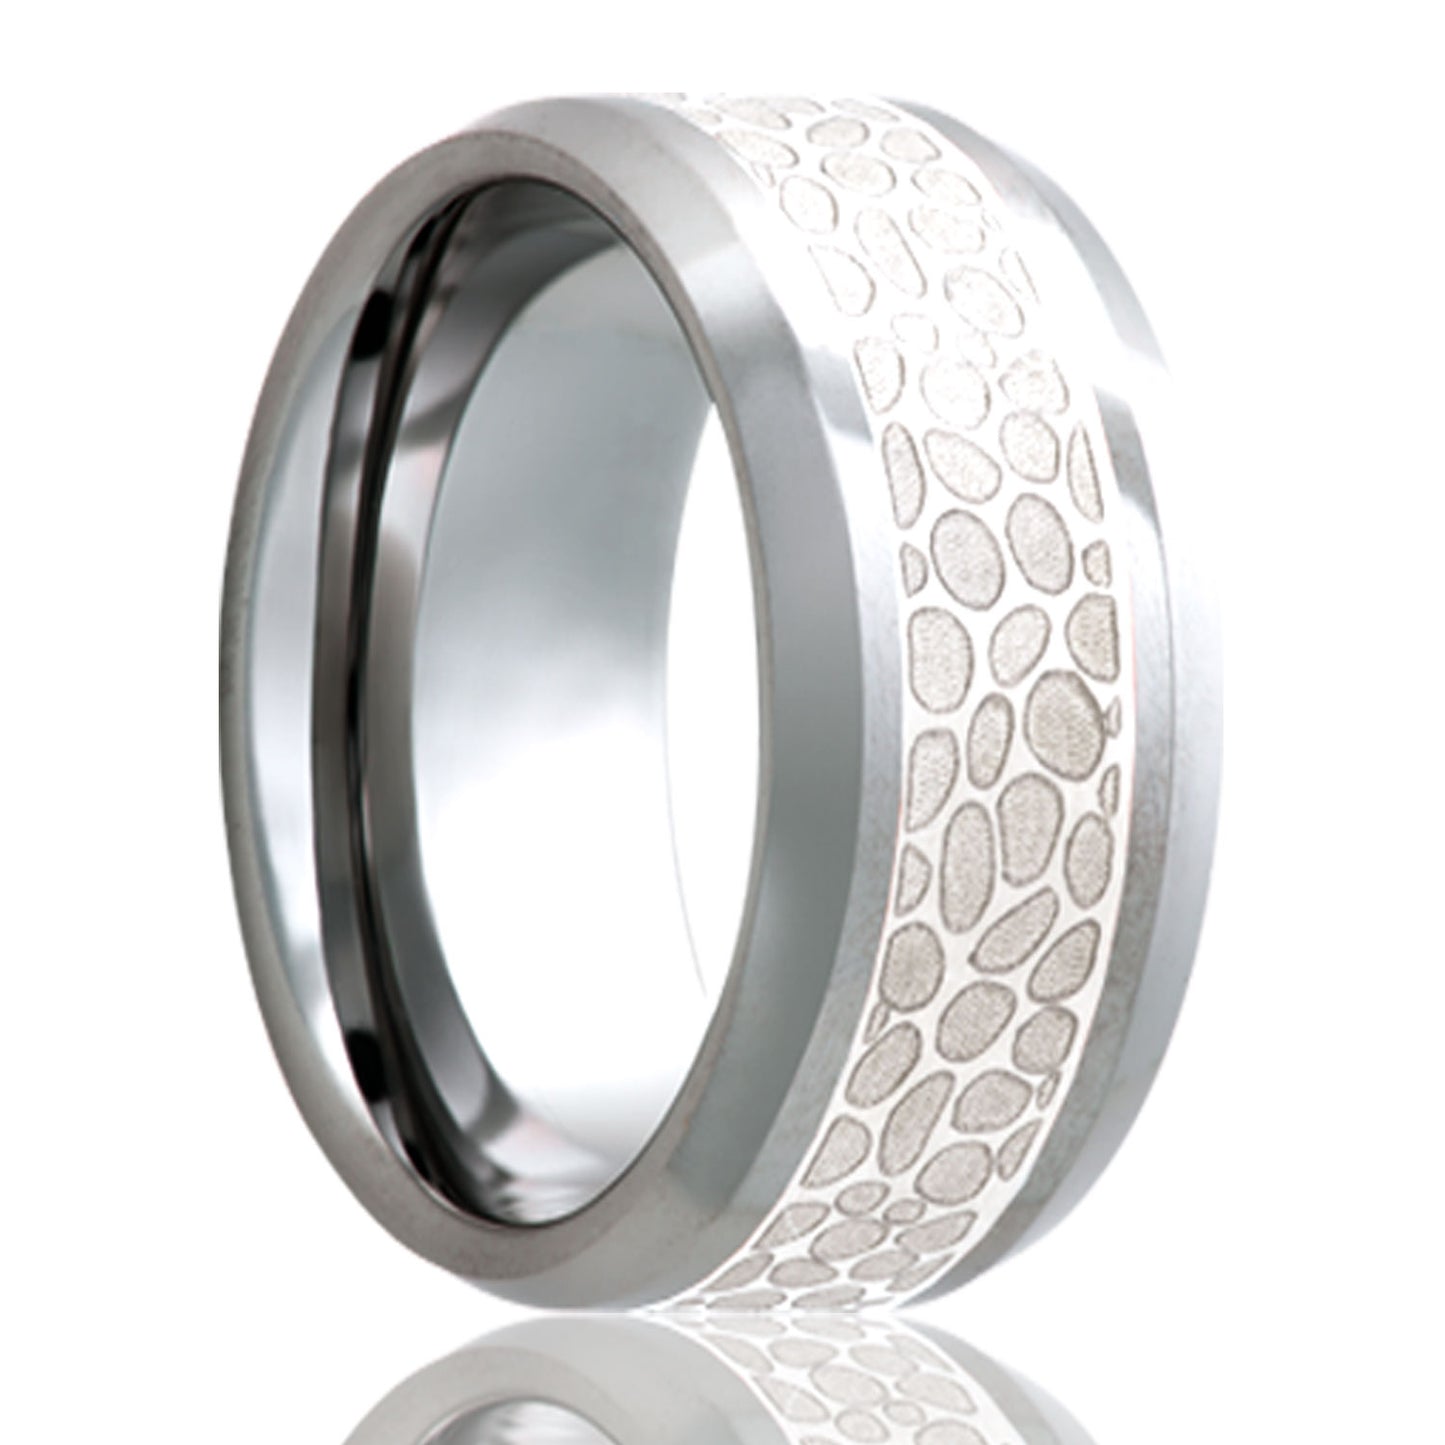 A hammered silver inlay cobalt men's wedding band with beveled edges displayed on a neutral white background.